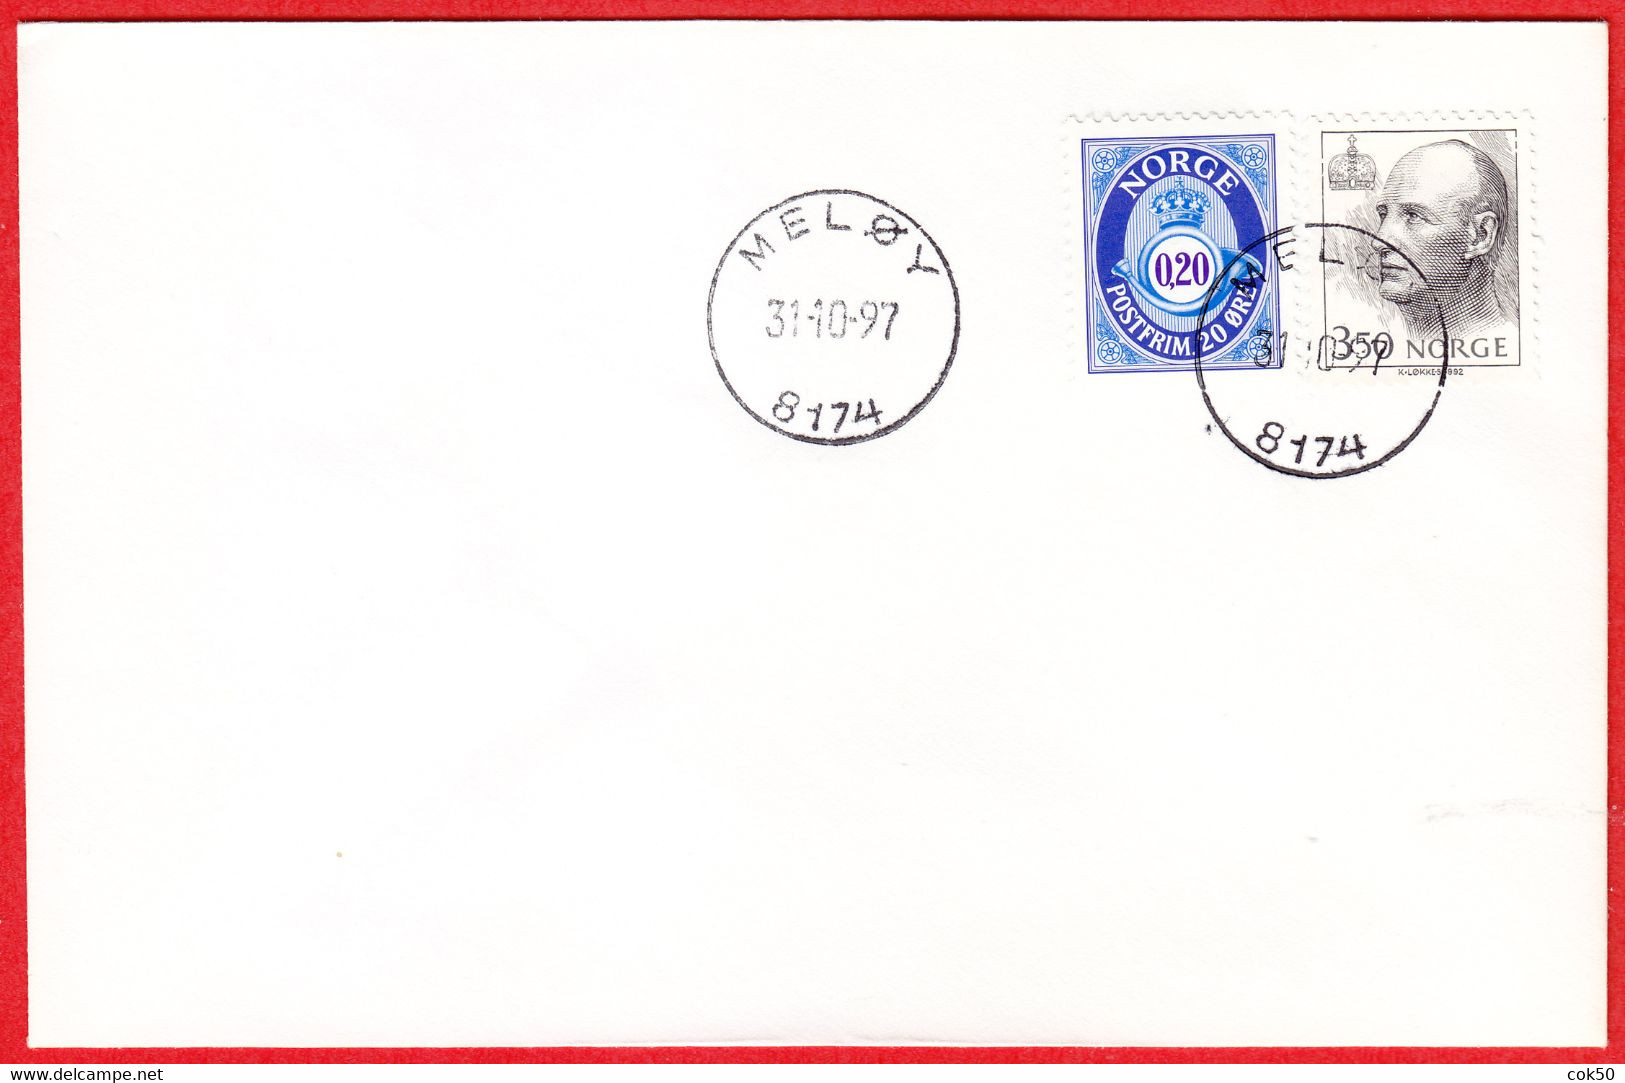 NORWAY -  8174 MELØY (Nordland County) - Last Day/postoffice Closed On 1997.10.31 - Local Post Stamps